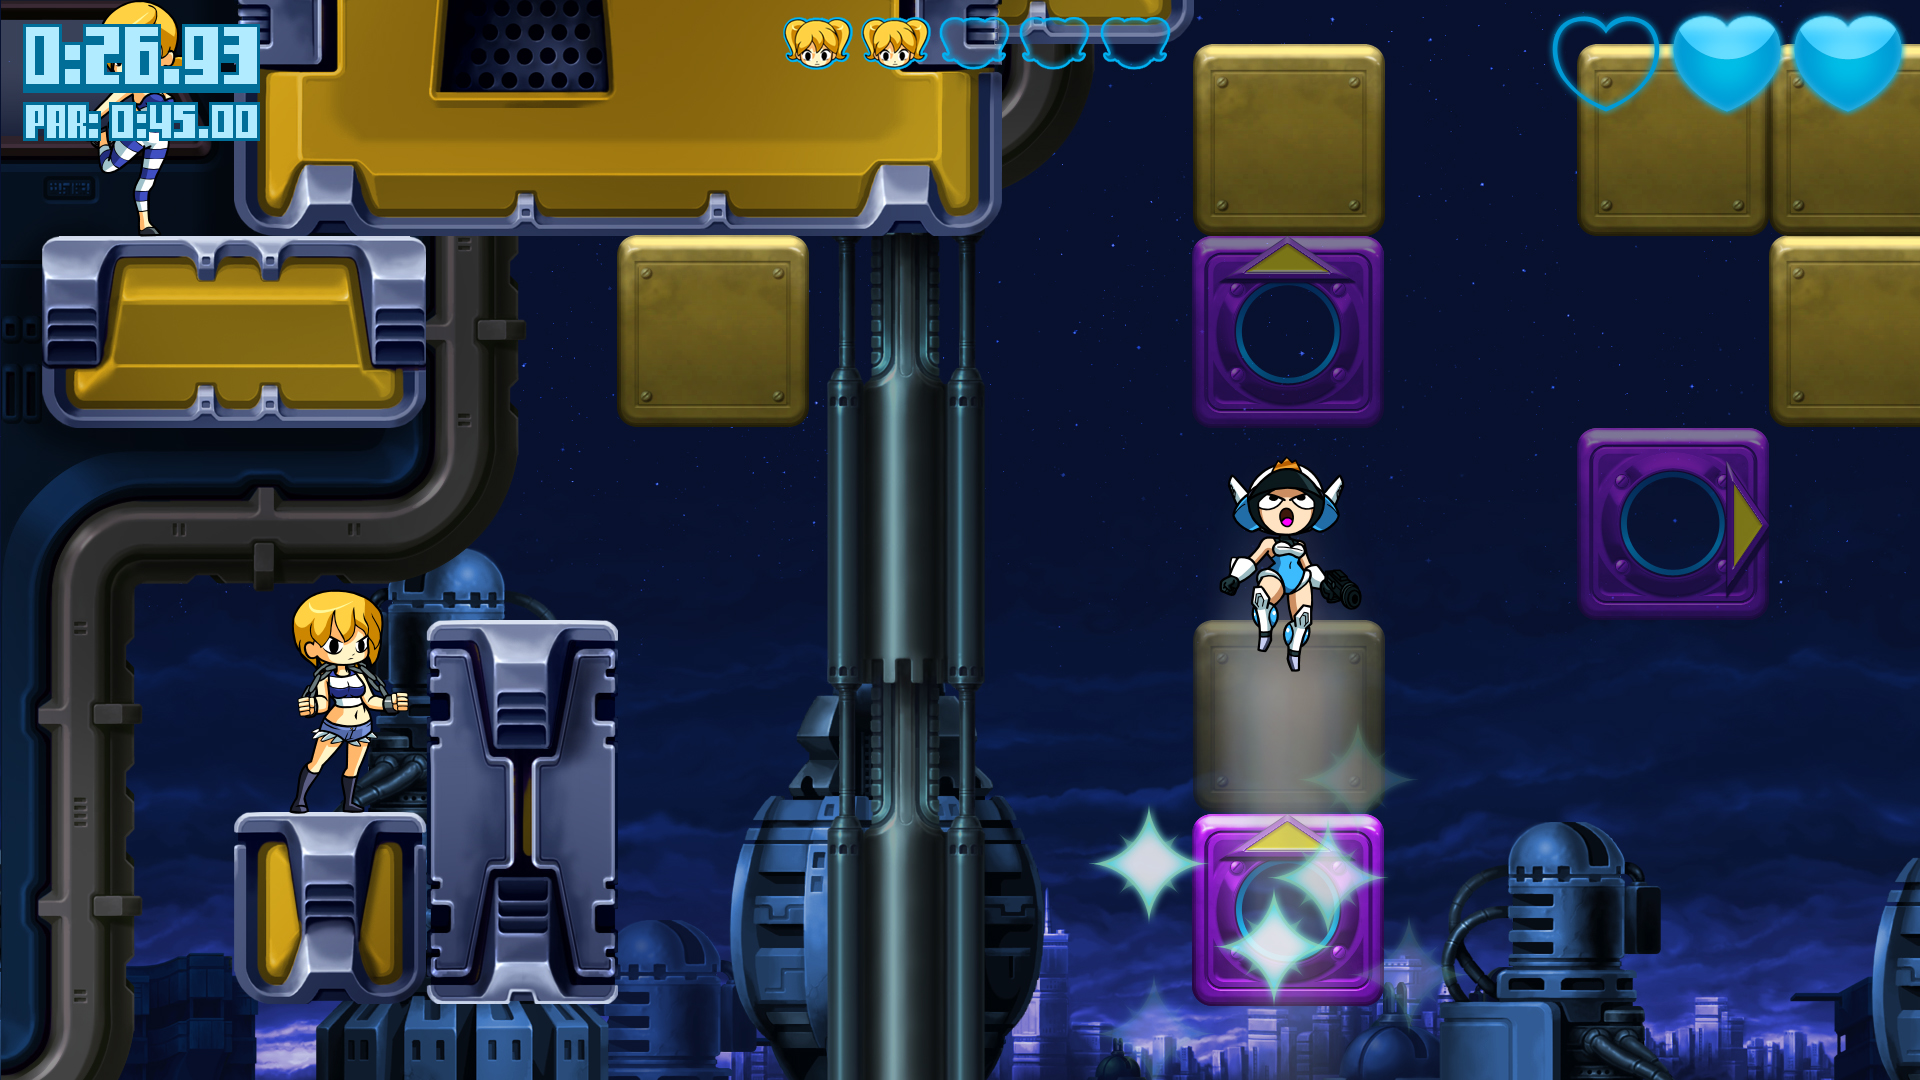 Mighty Switch Force! Hyper Drive Edition Steam CD Key 5.64 USD